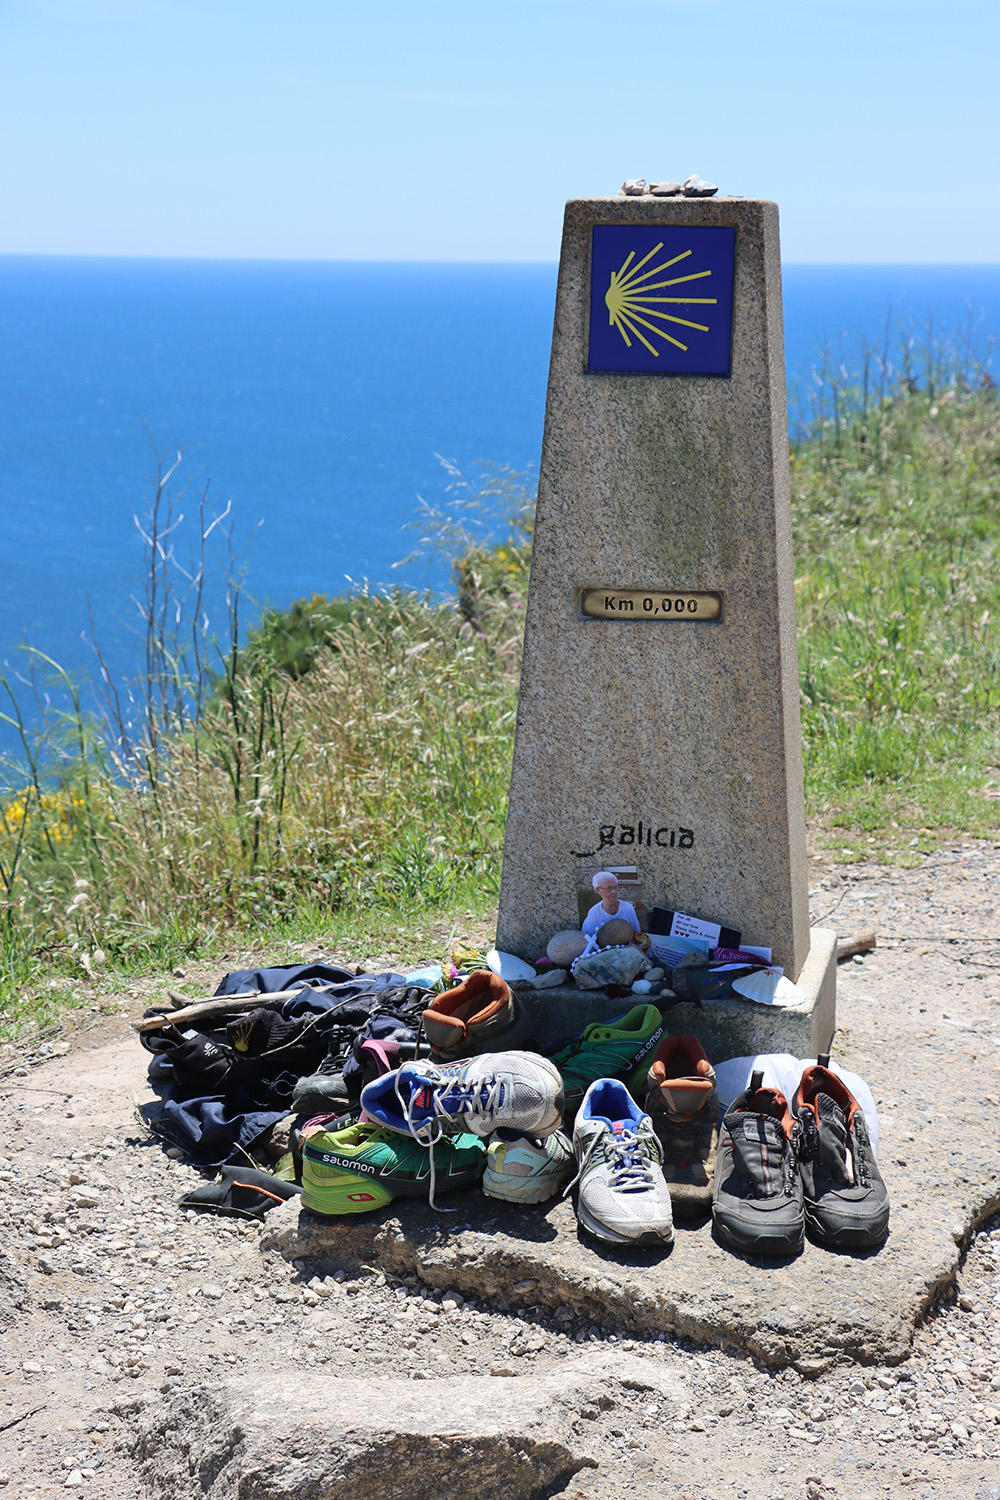 shoes and memorial items at a trail marker